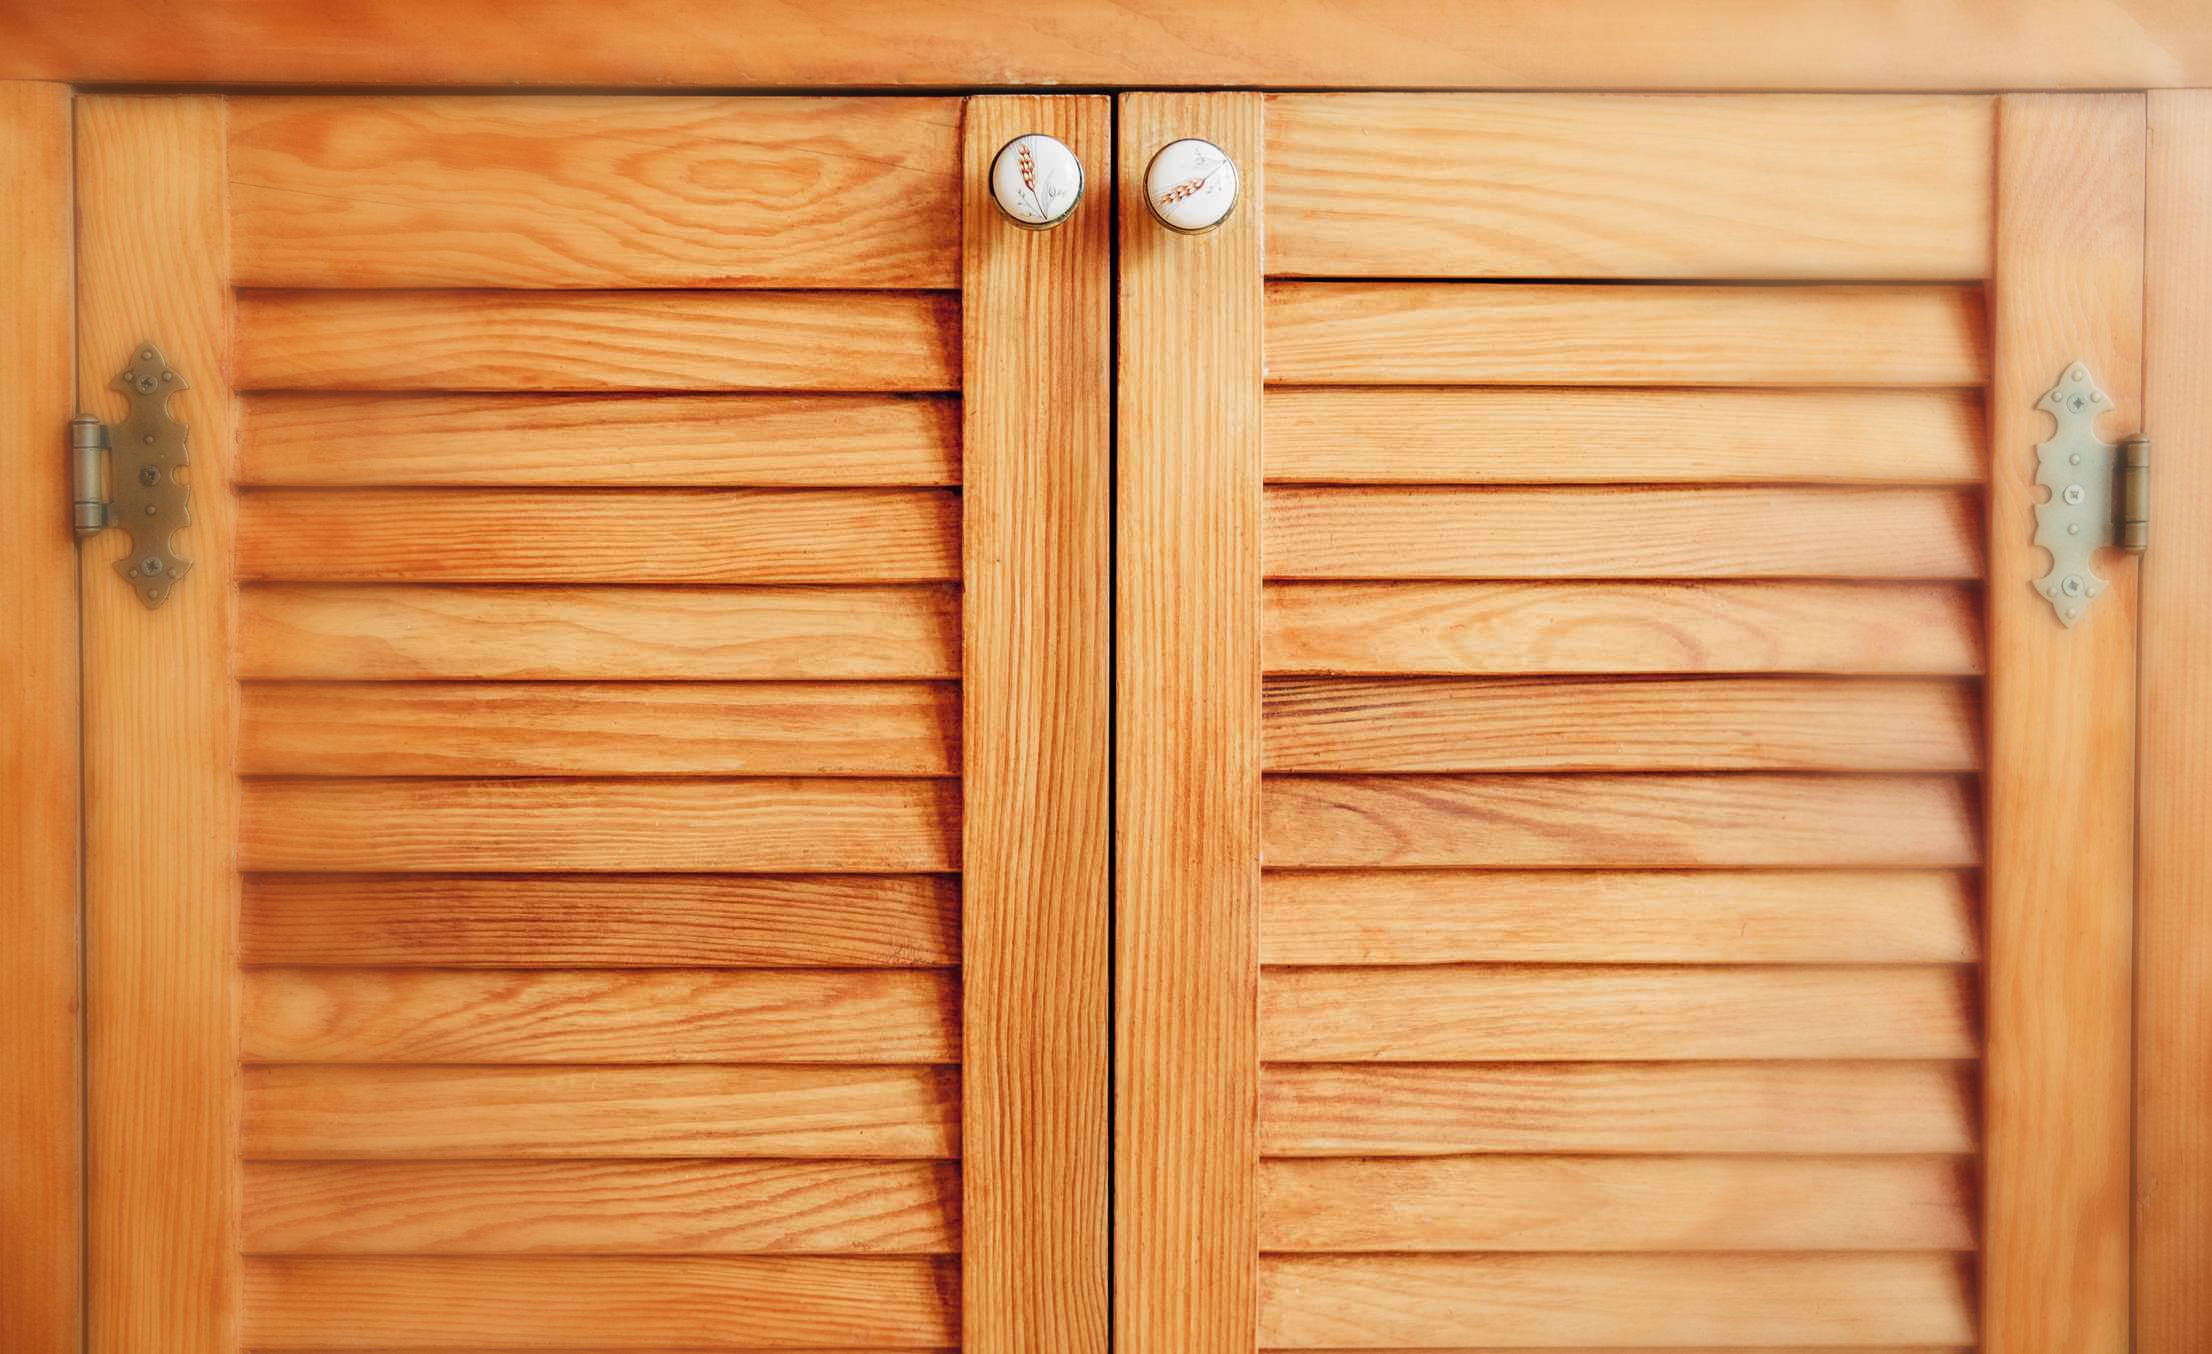 What Are Louvered Doors?